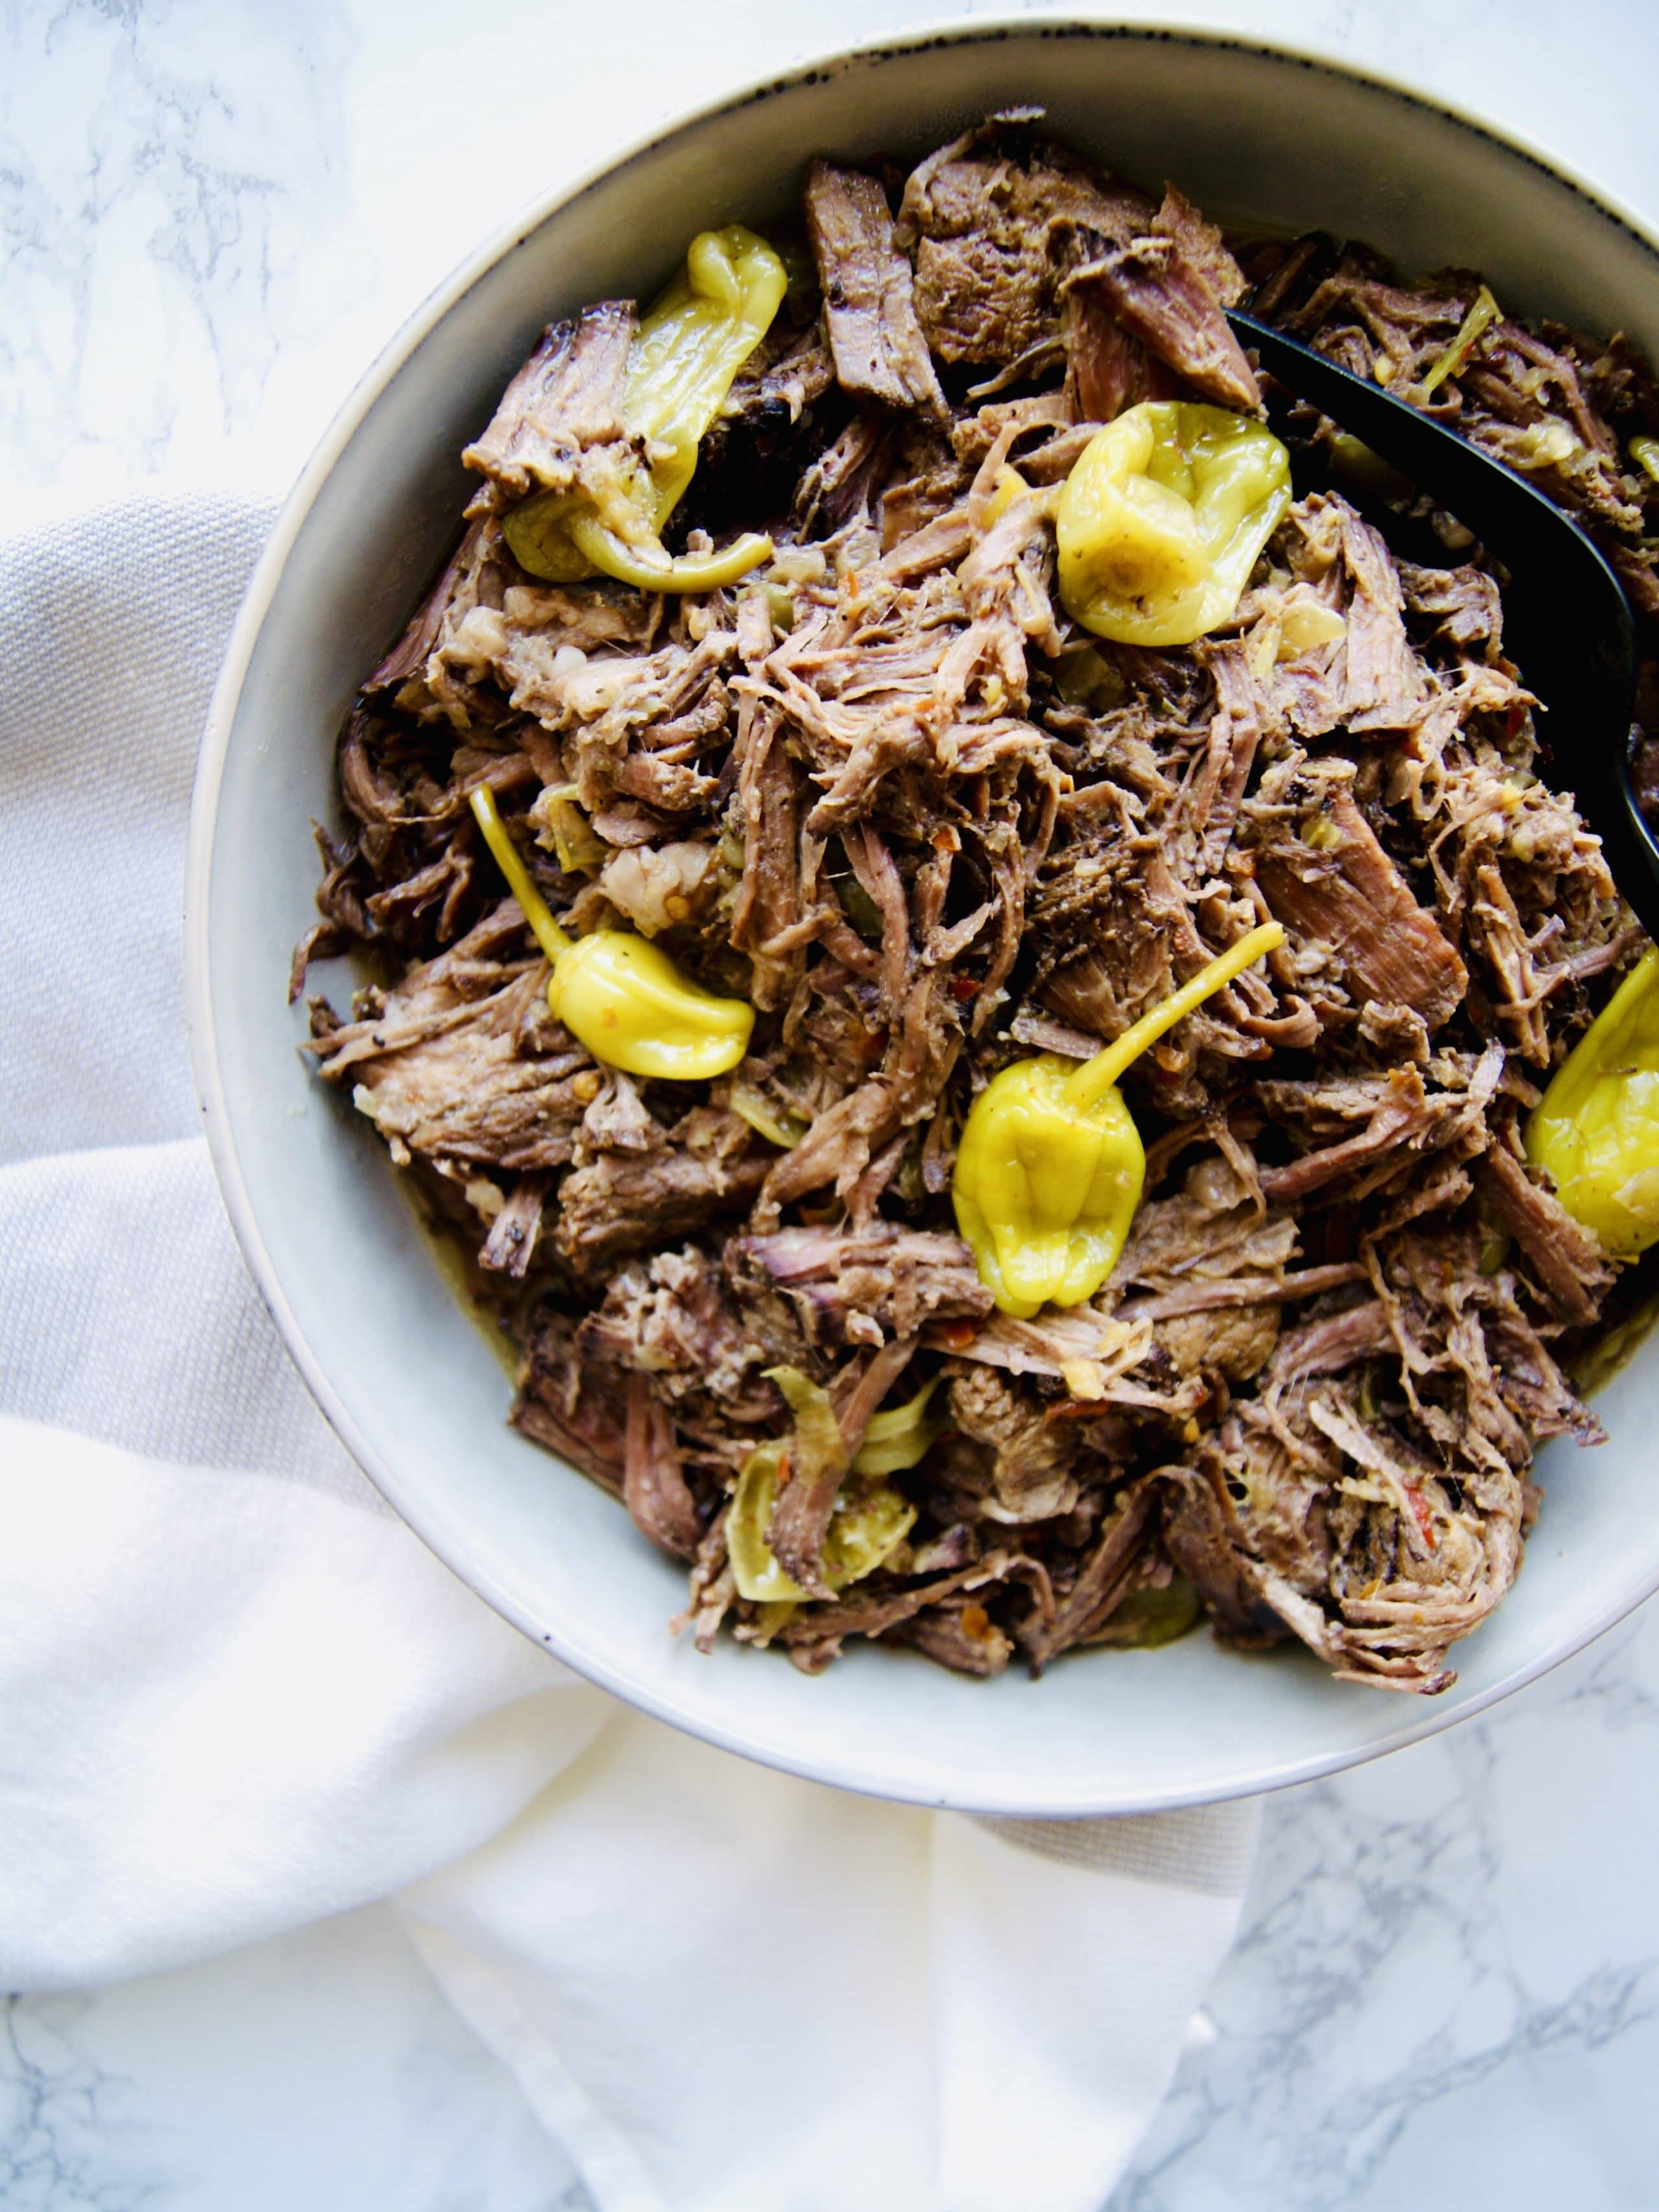 Chuck Roast cooks low and slow in the crockpot and results in a tangy, slightly spicy, shredded Italian Beef that your family will love. Perfect on its own or in hoagie buns for Italian Beef Sandwiches. Recipe at KathleensCravings.com #slowcookerrecipes #chuckroastrecipes #slowcookerbeef #italianbeefrecipe